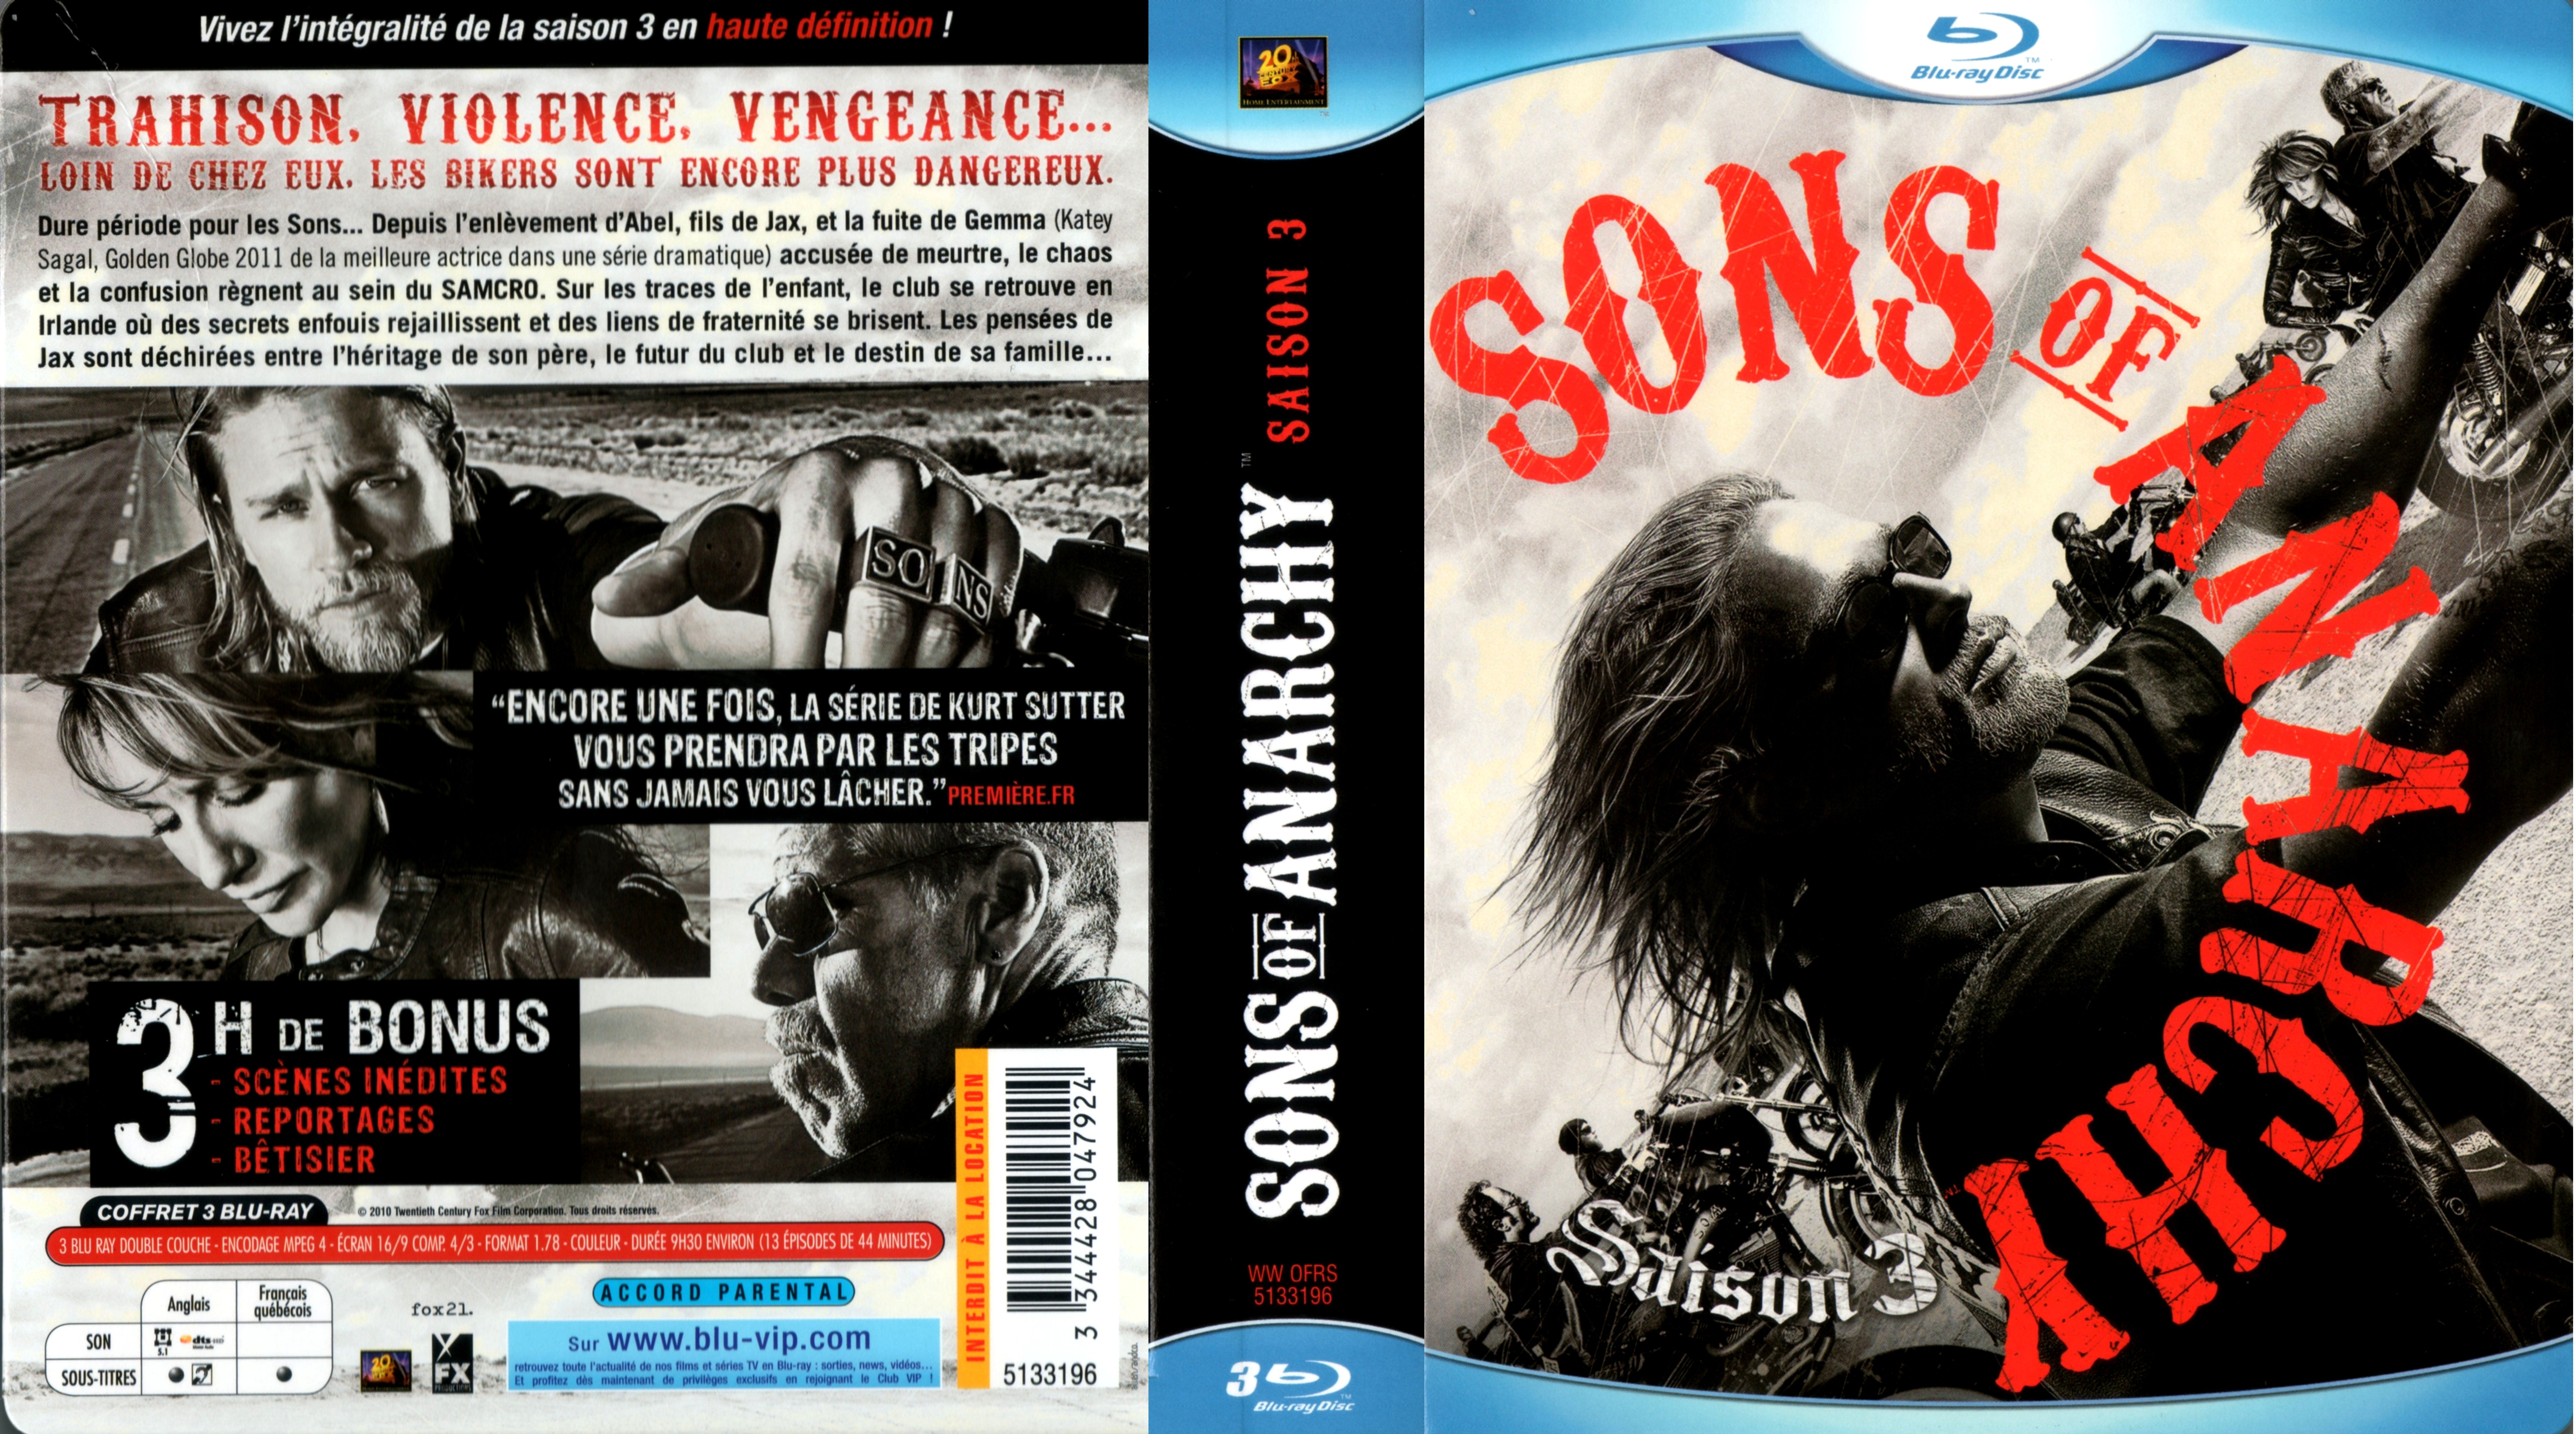 Jaquette DVD Sons of anarchy Saison 3 COFFRET (BLU-RAY)